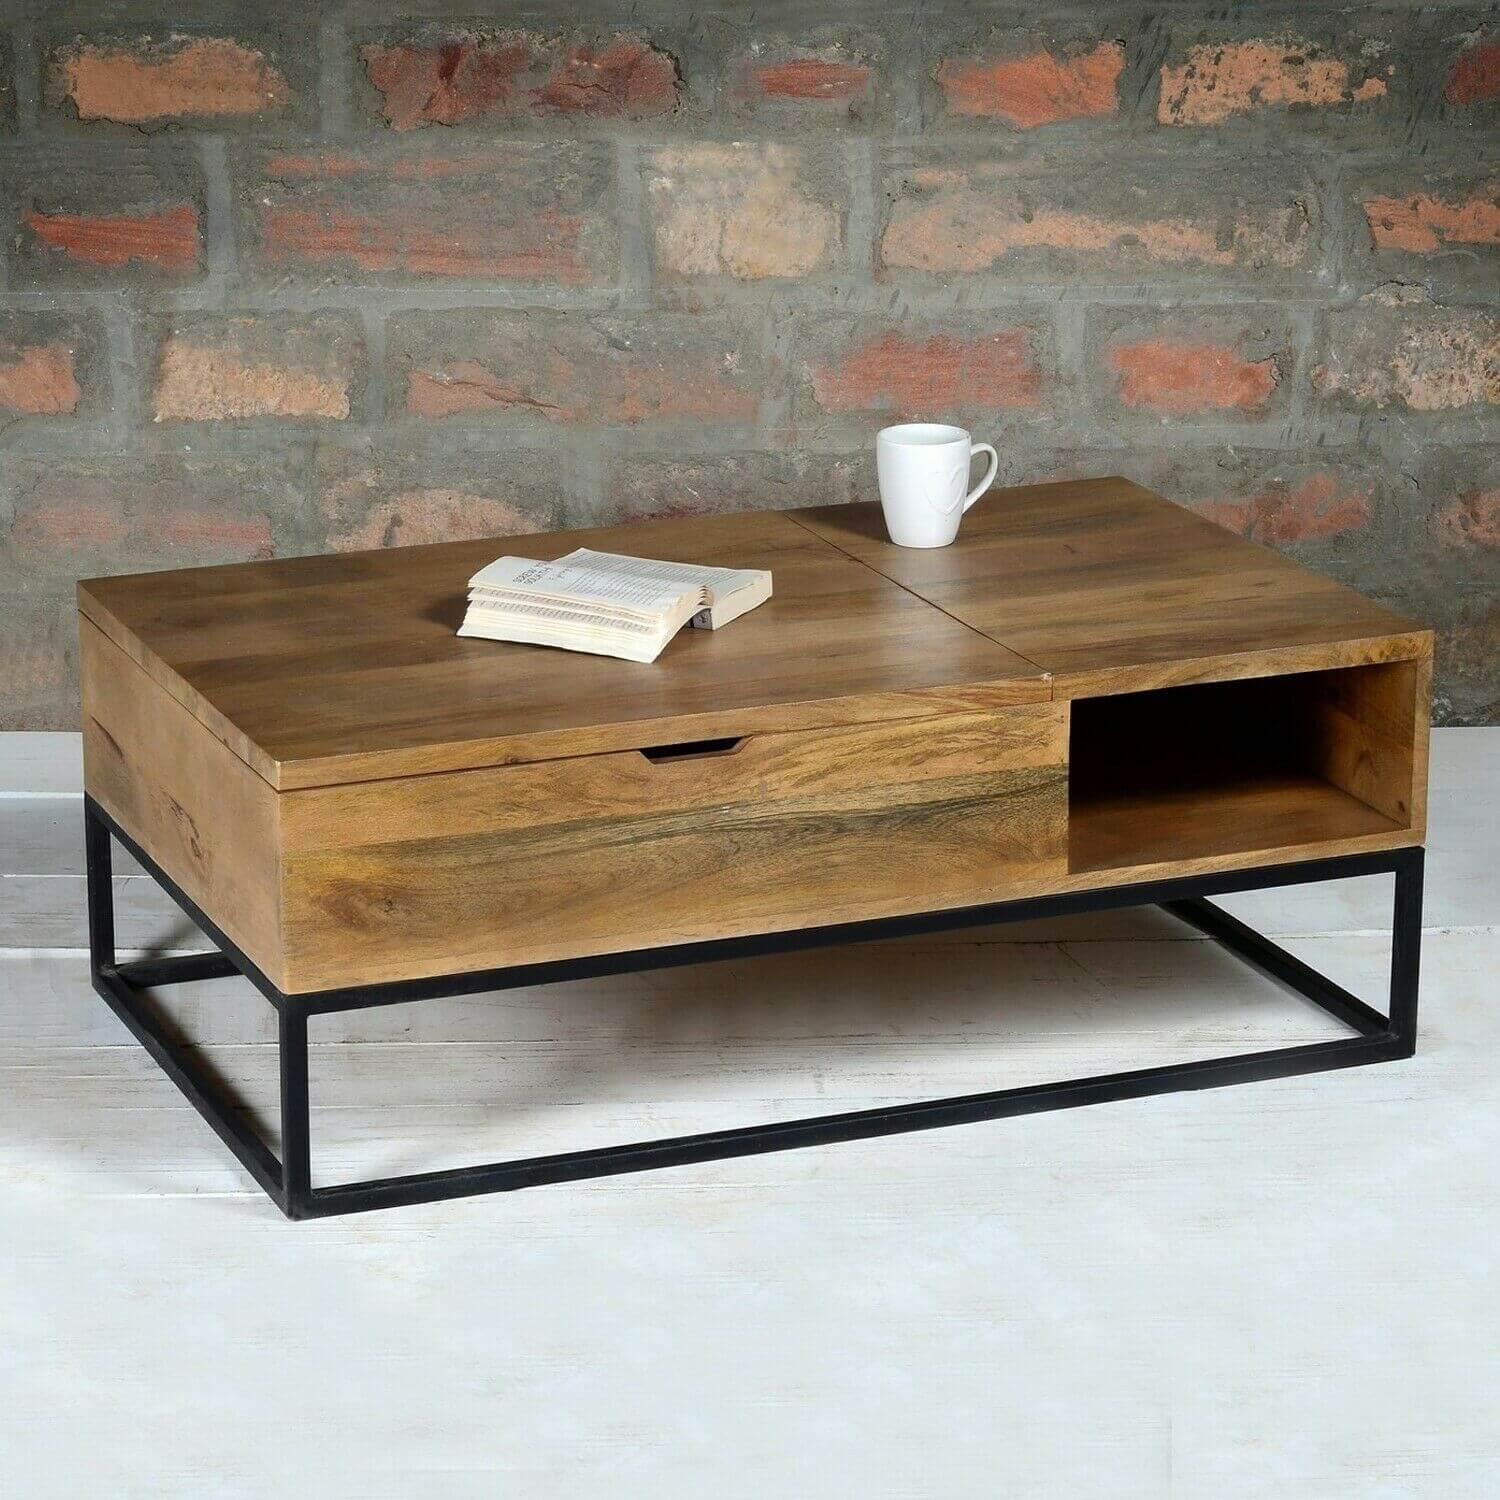 Solid Wood and Metal Coffee Table with Storage